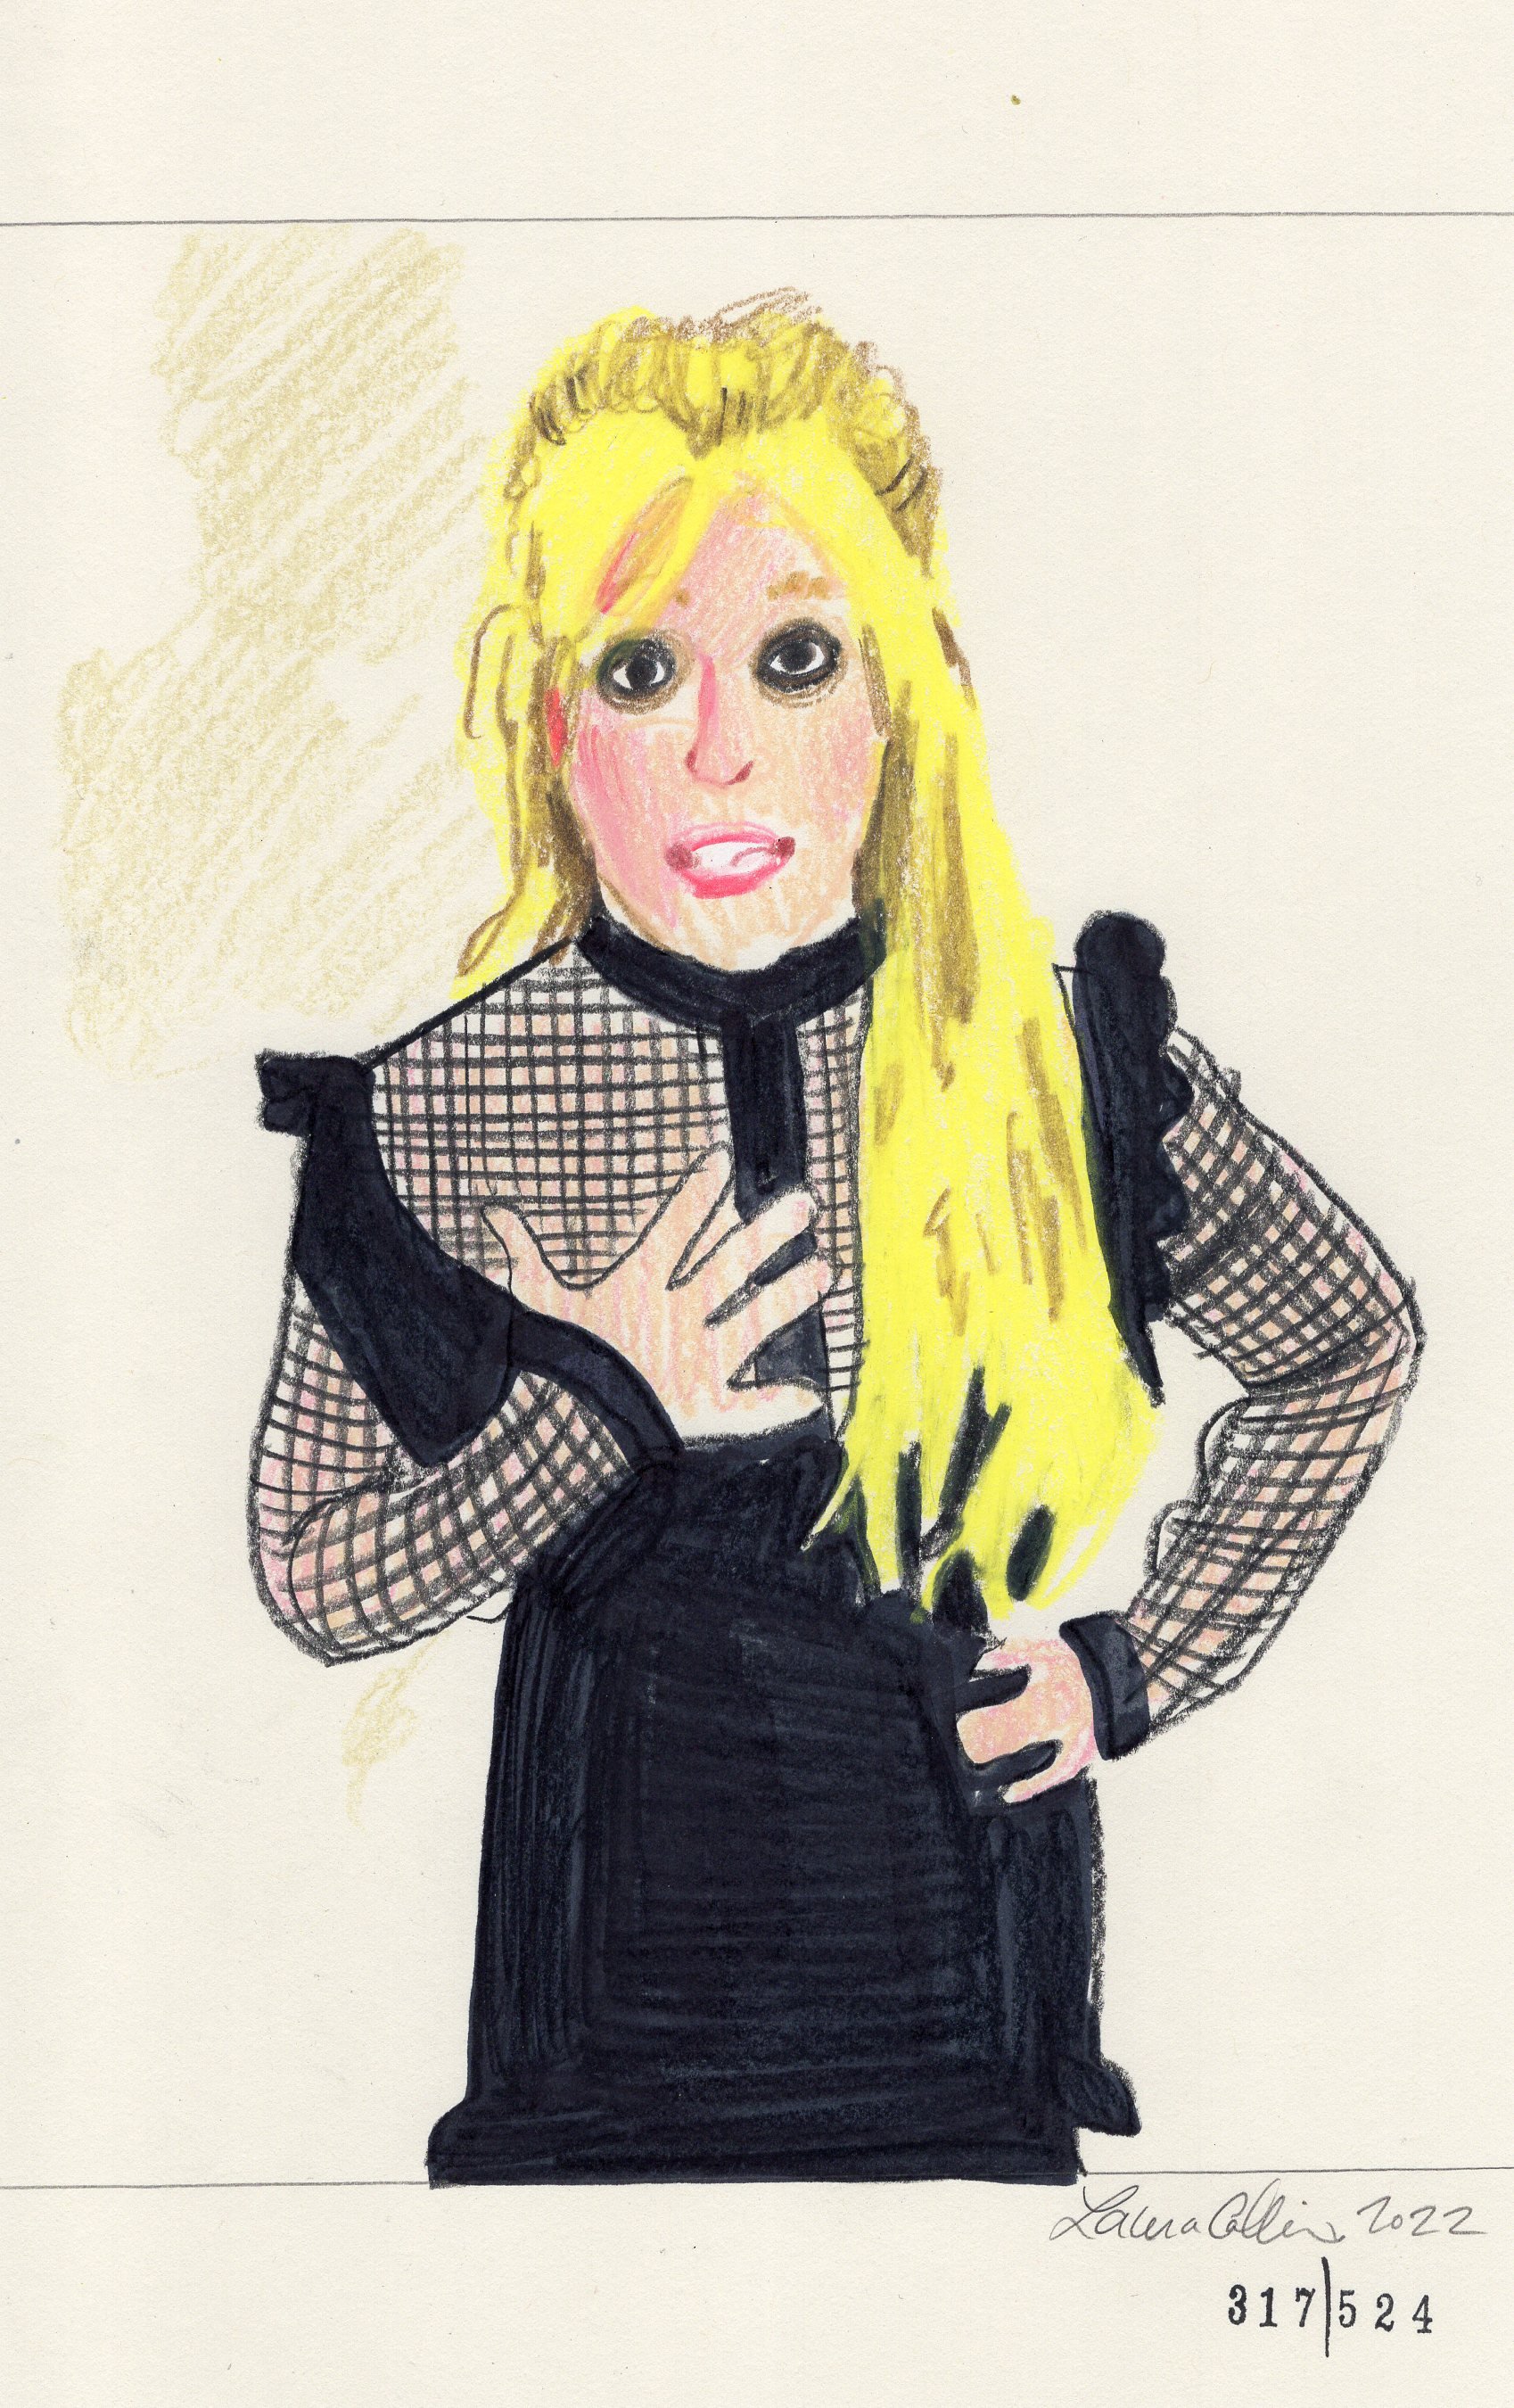 Laura Collins Britney Spears Animation 6x9in mixed media 2022 no317.jpg